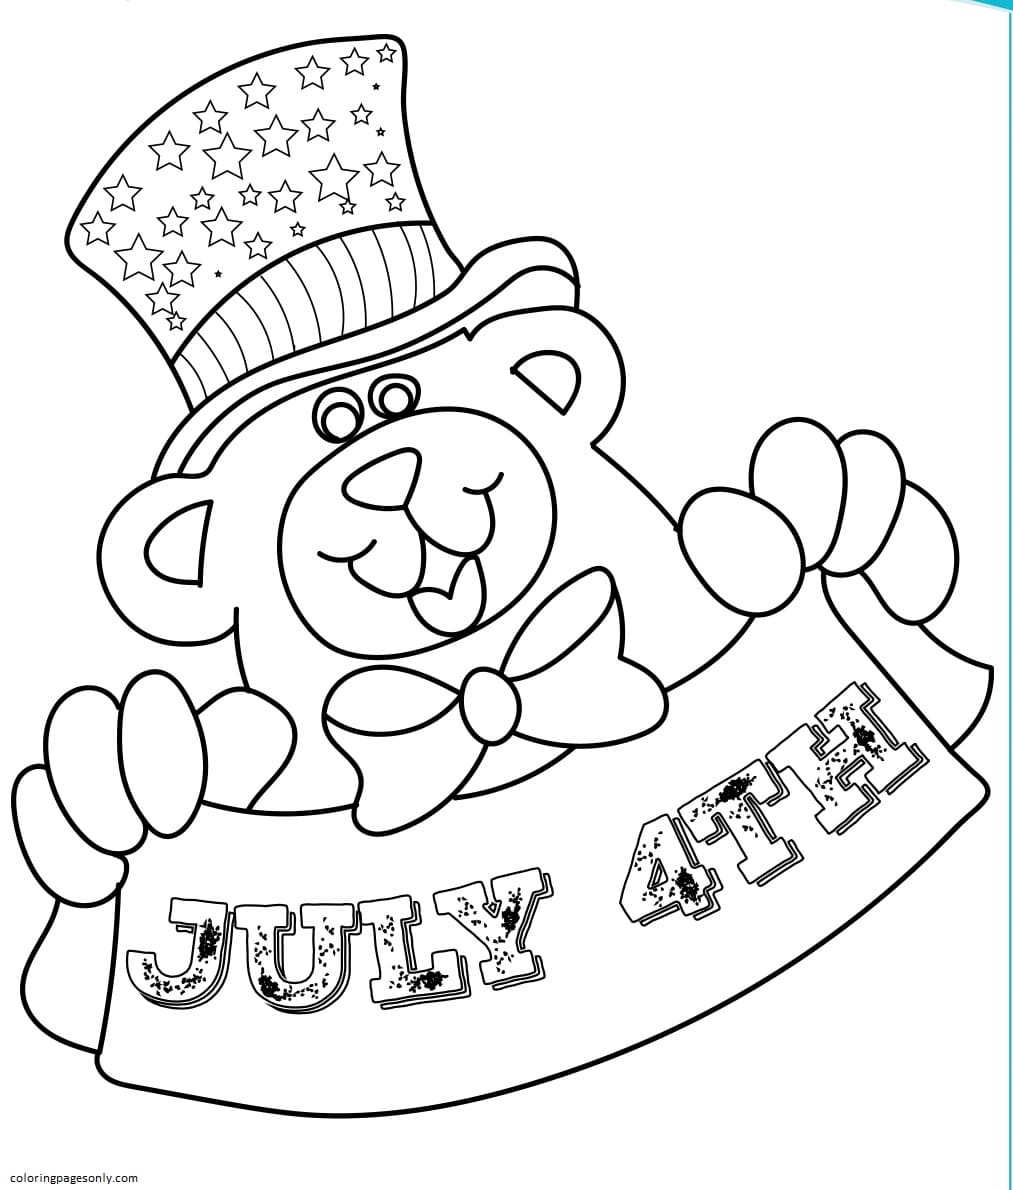 Patriotic Teddy Holding Banner Coloring Pages - 4th Of July Coloring